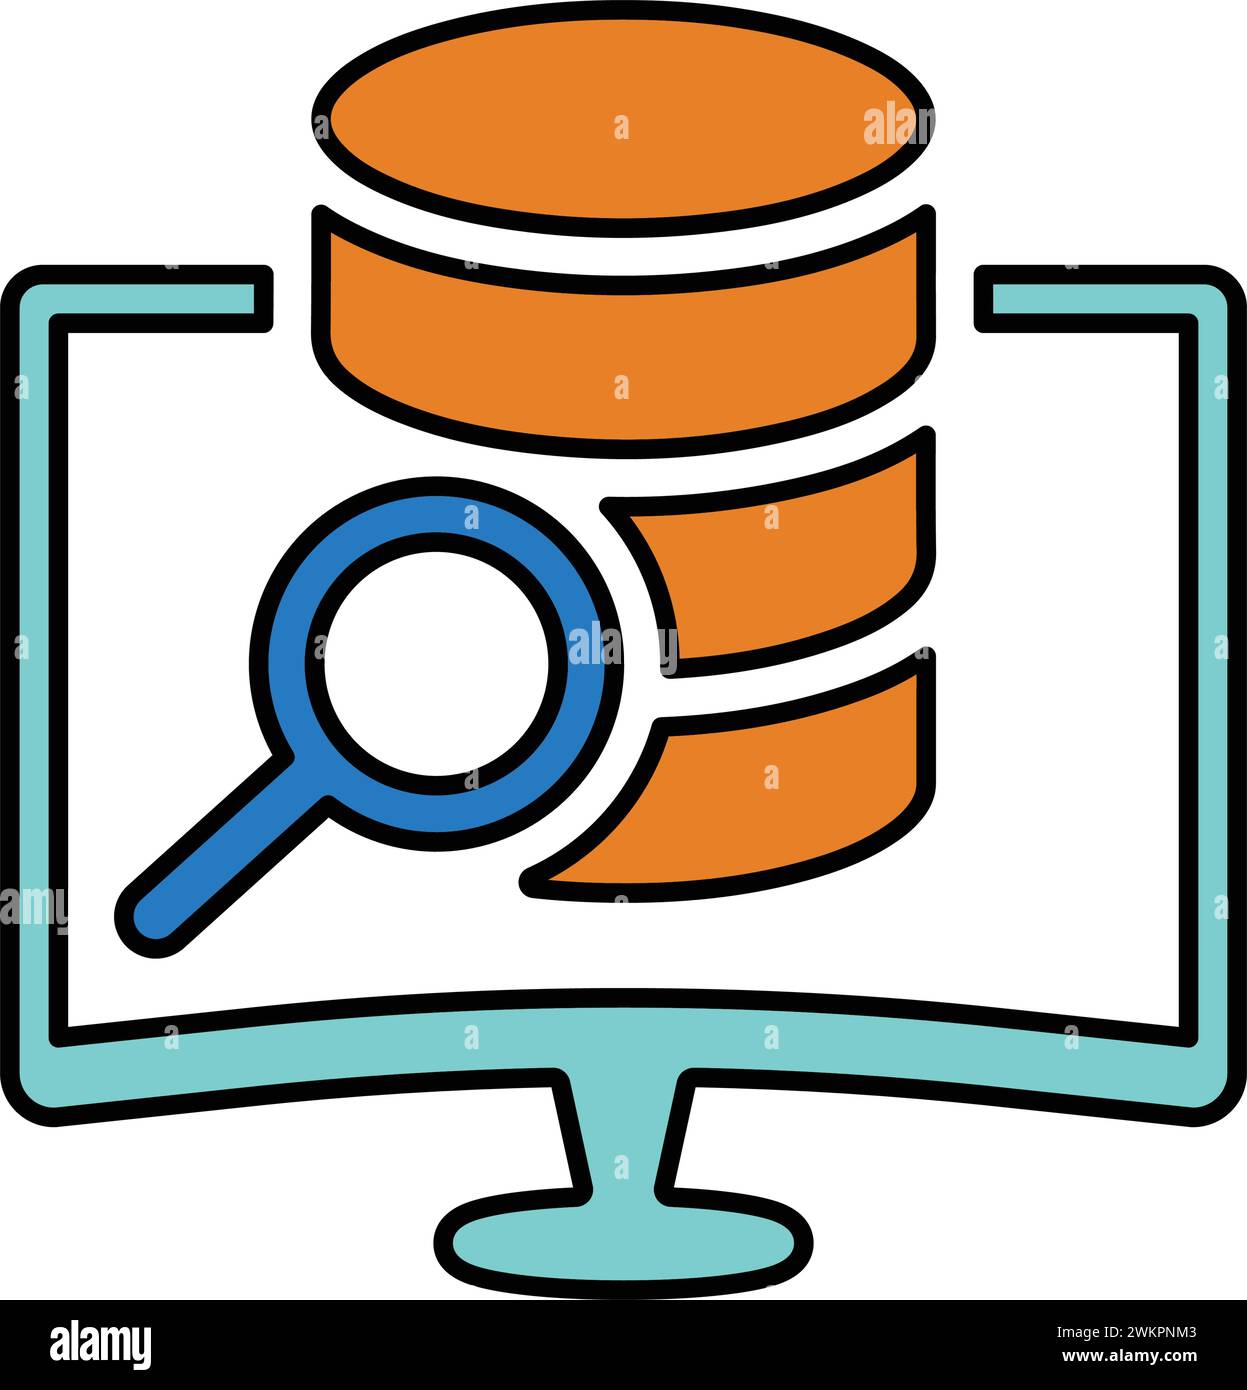 Data, analysis, summary icon. Simple vector illustration for web, print files, graphic or commercial purposes. Stock Vector